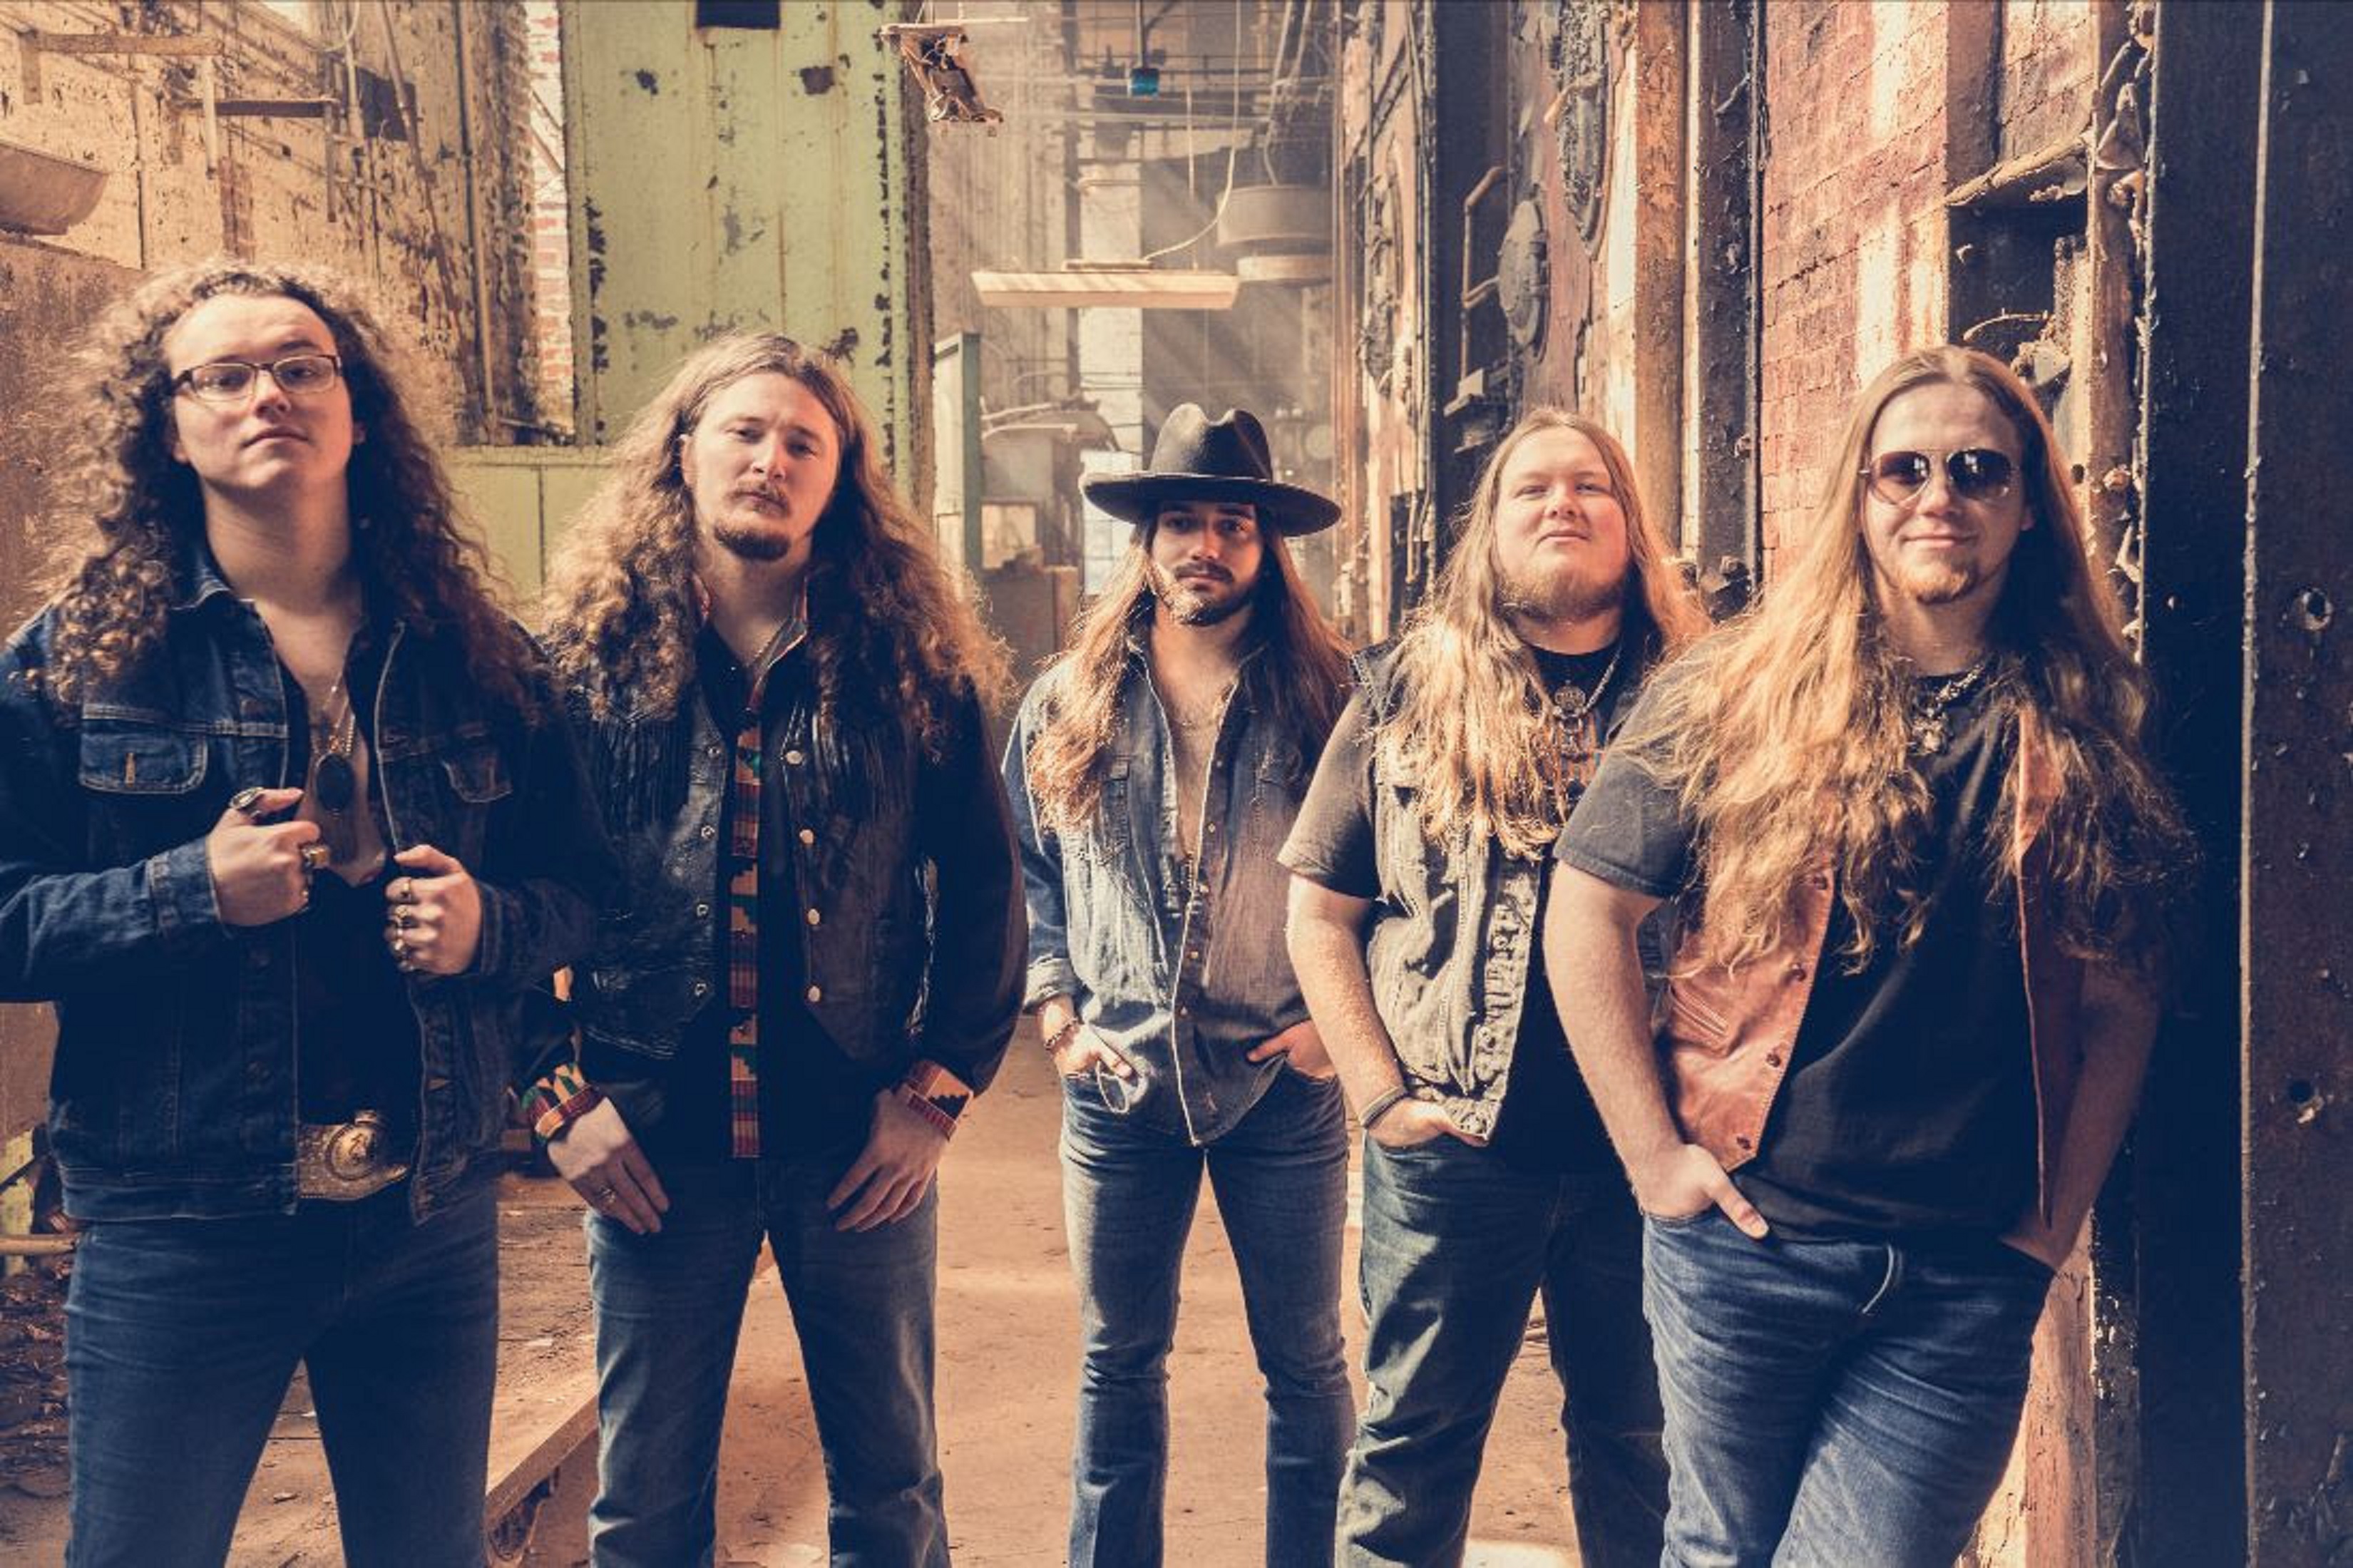 A Classic Southern Rock Anthem About Life’s Ups And Downs